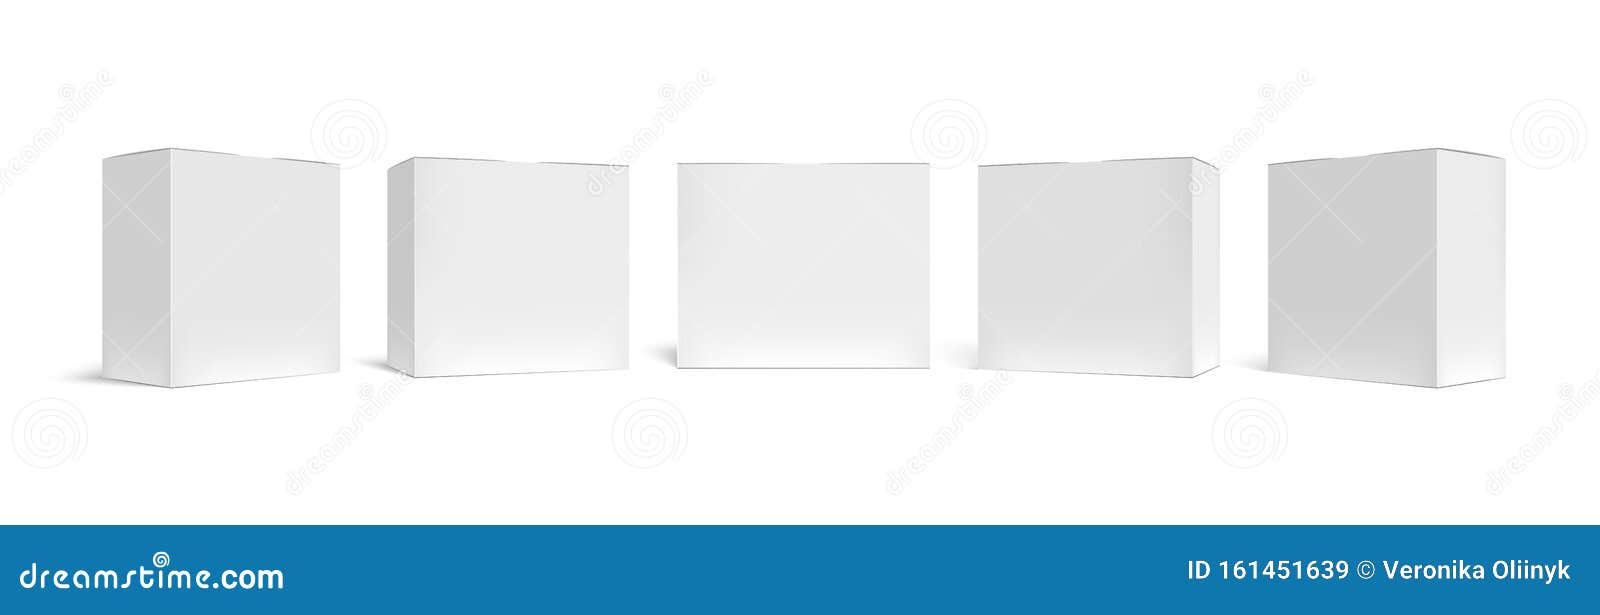 Download Realistic Packaging Box. White Cardboard Boxes Mockup ...